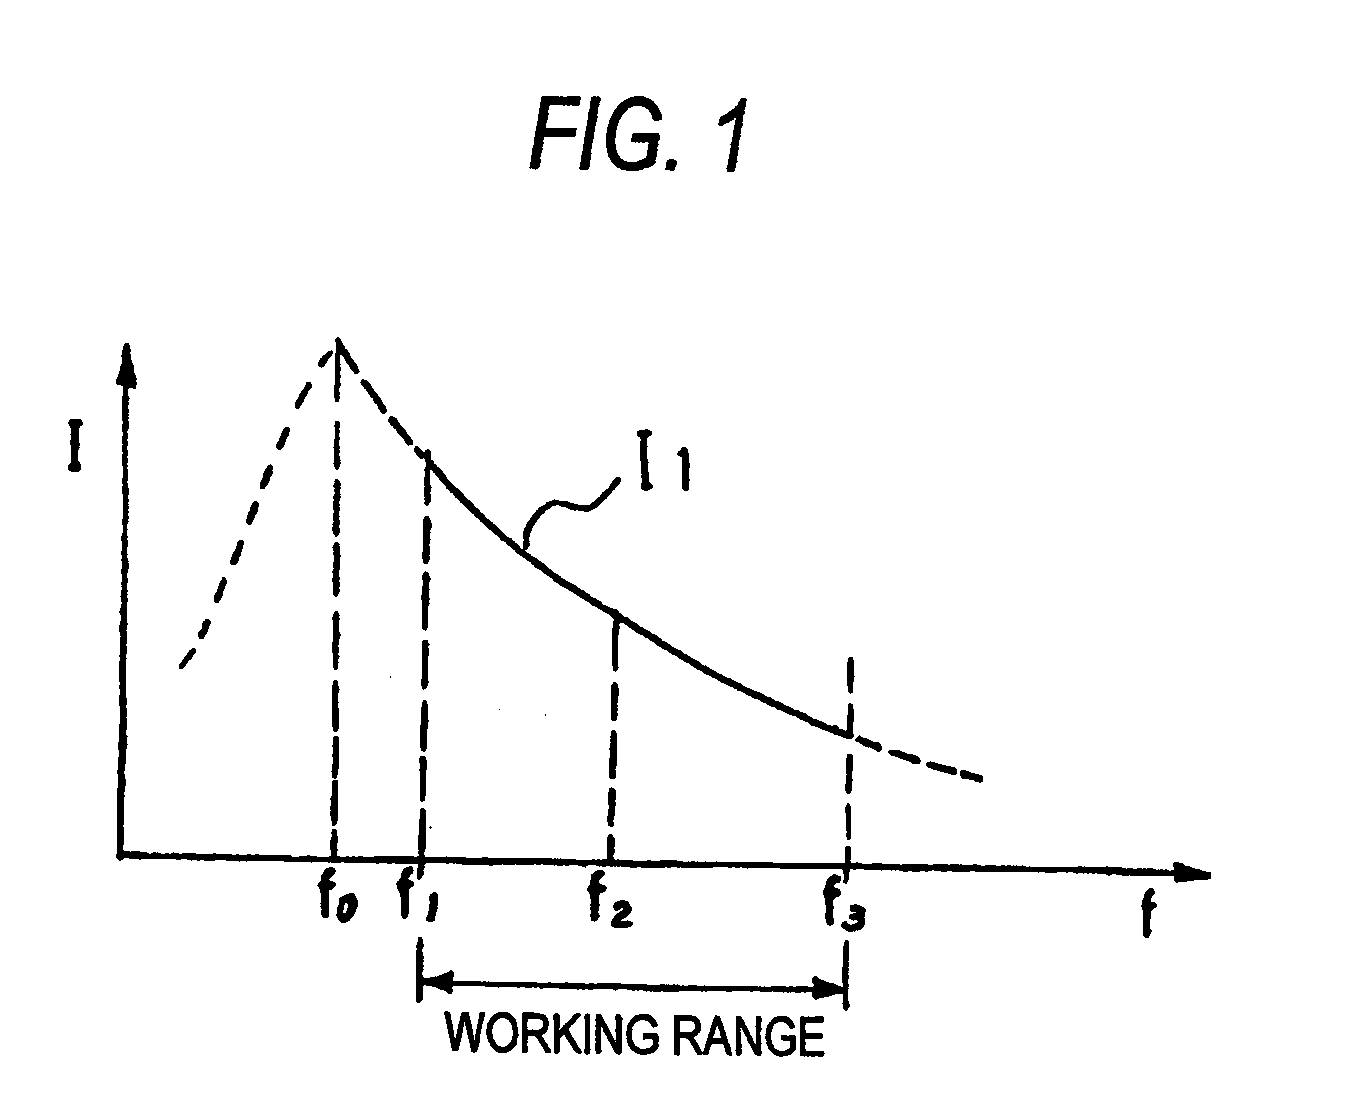 High-frequency heating device